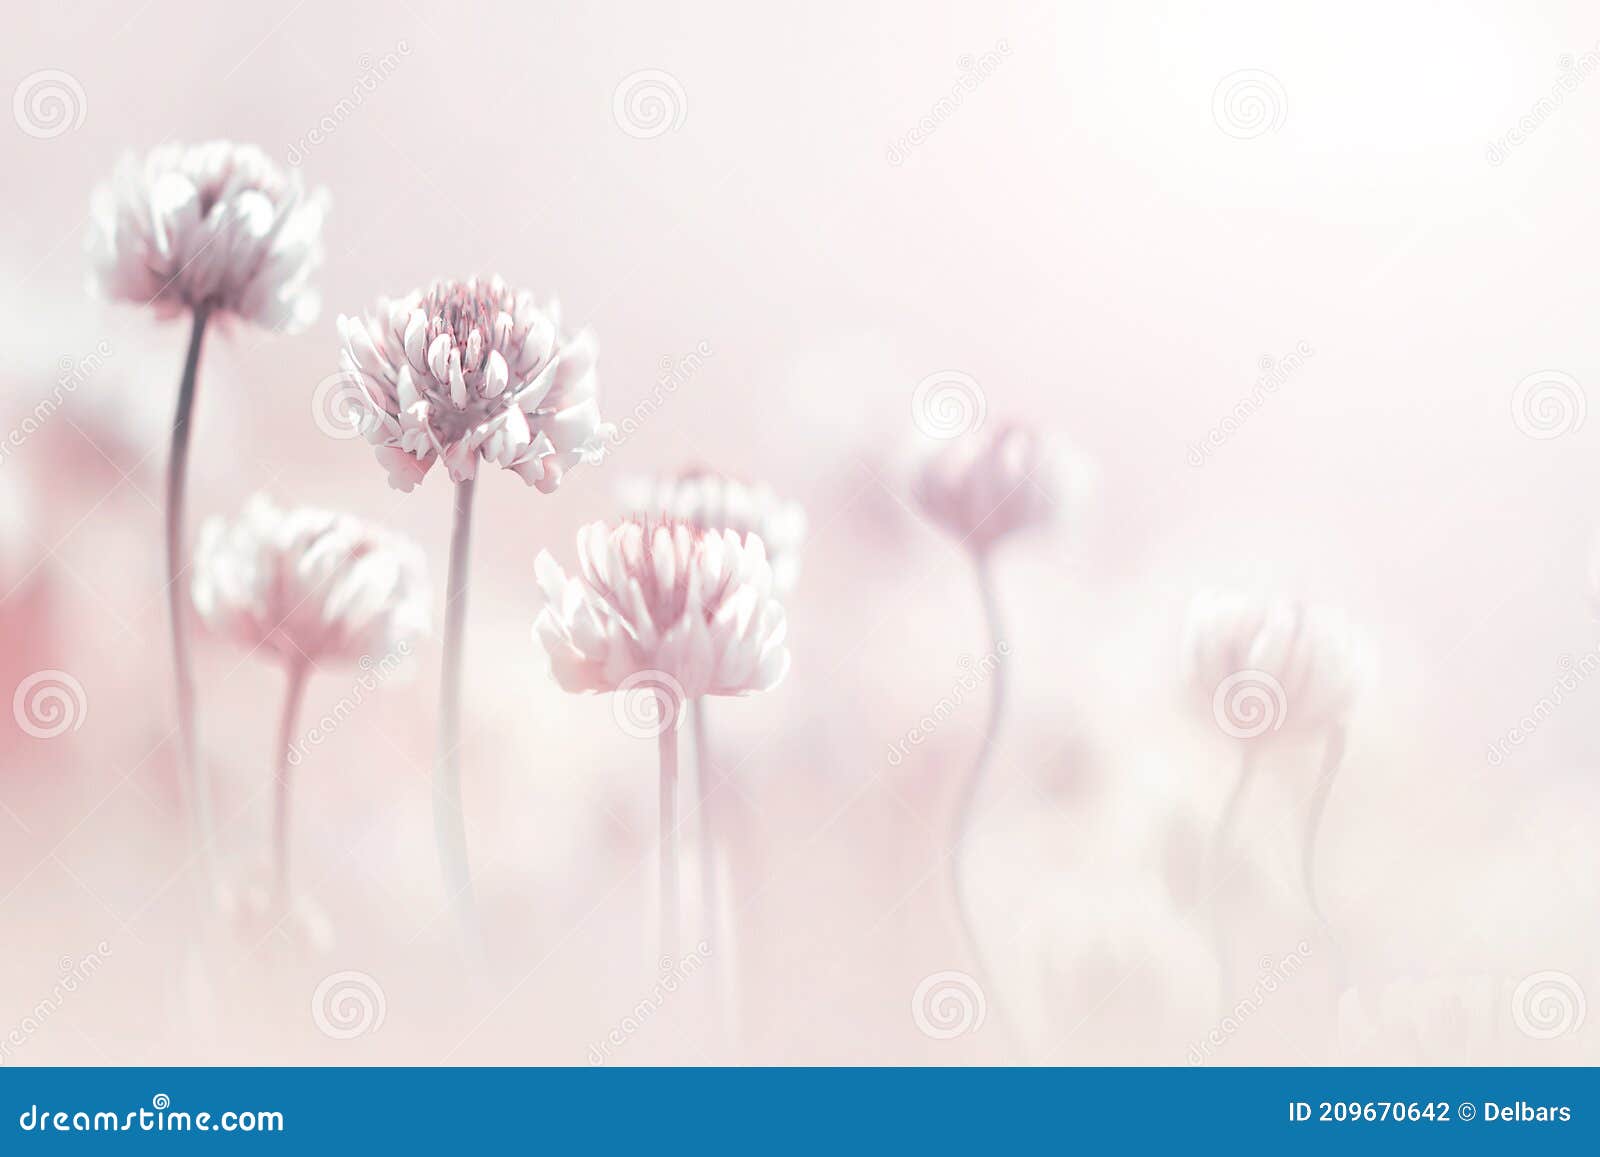 clover flowers in pastel colore. spring summer blur background.